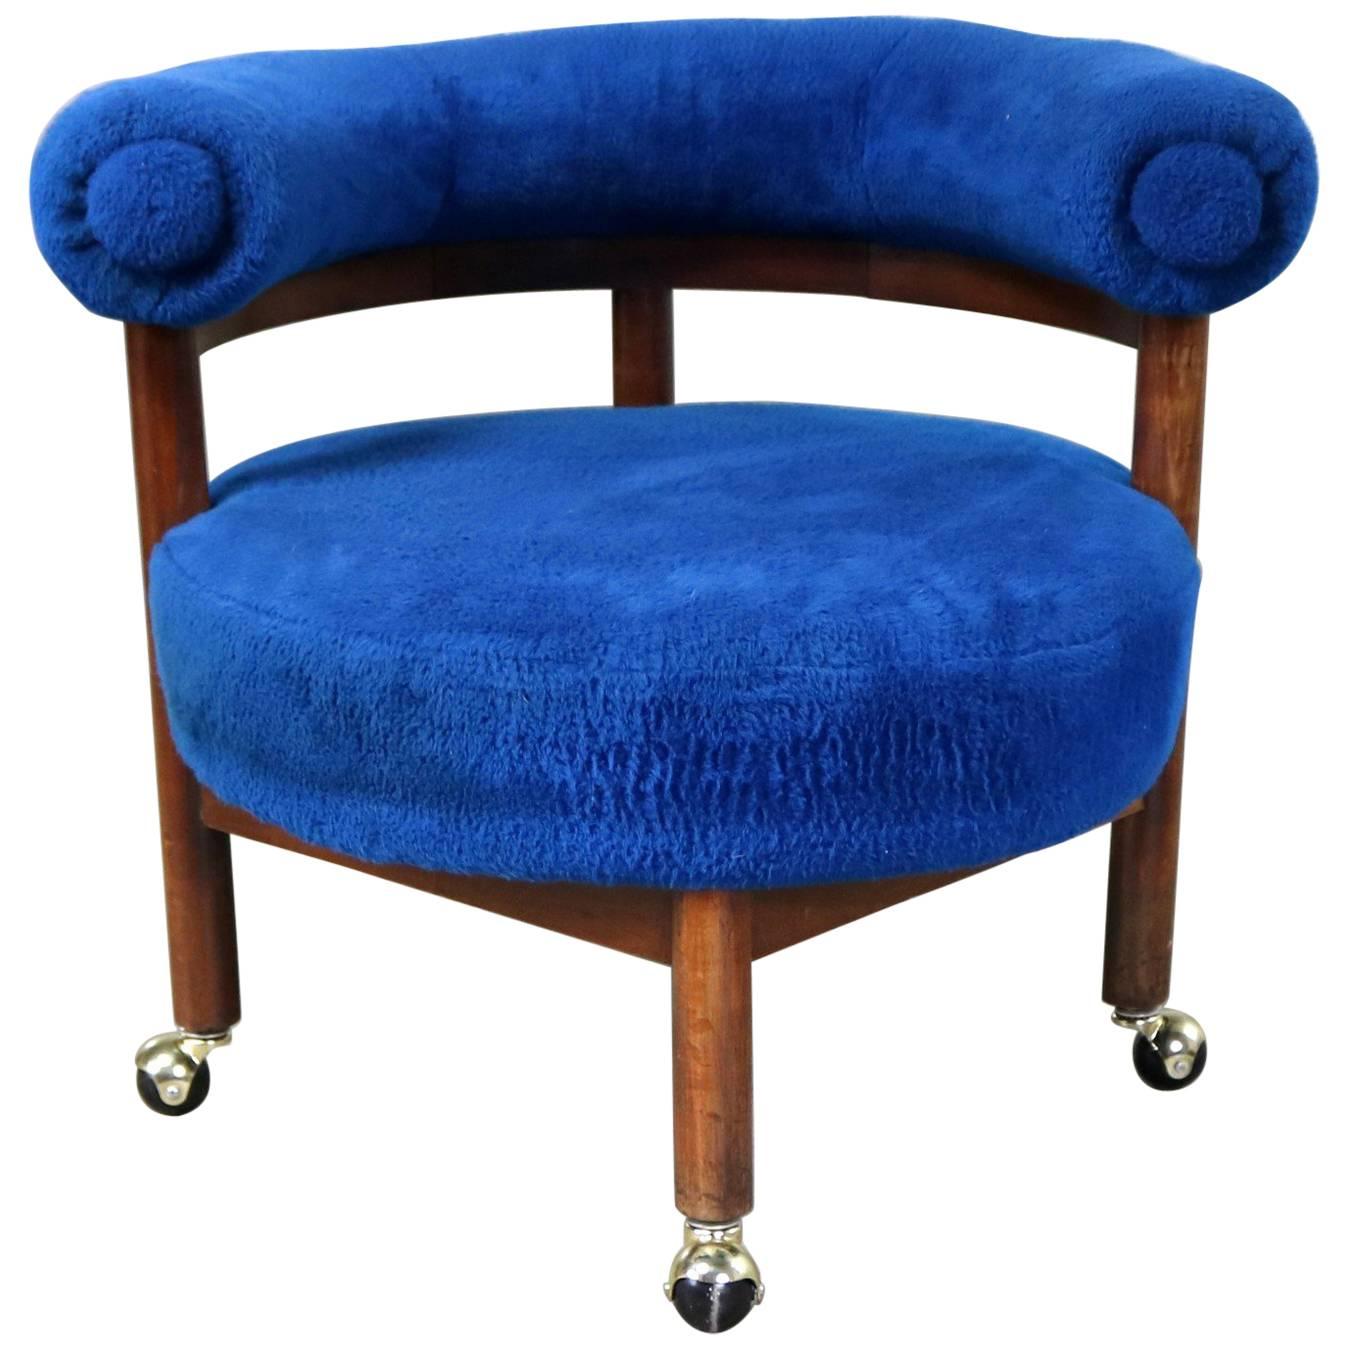 Royal Blue Round Corner Chair with Bolster Back on Casters Midcentury